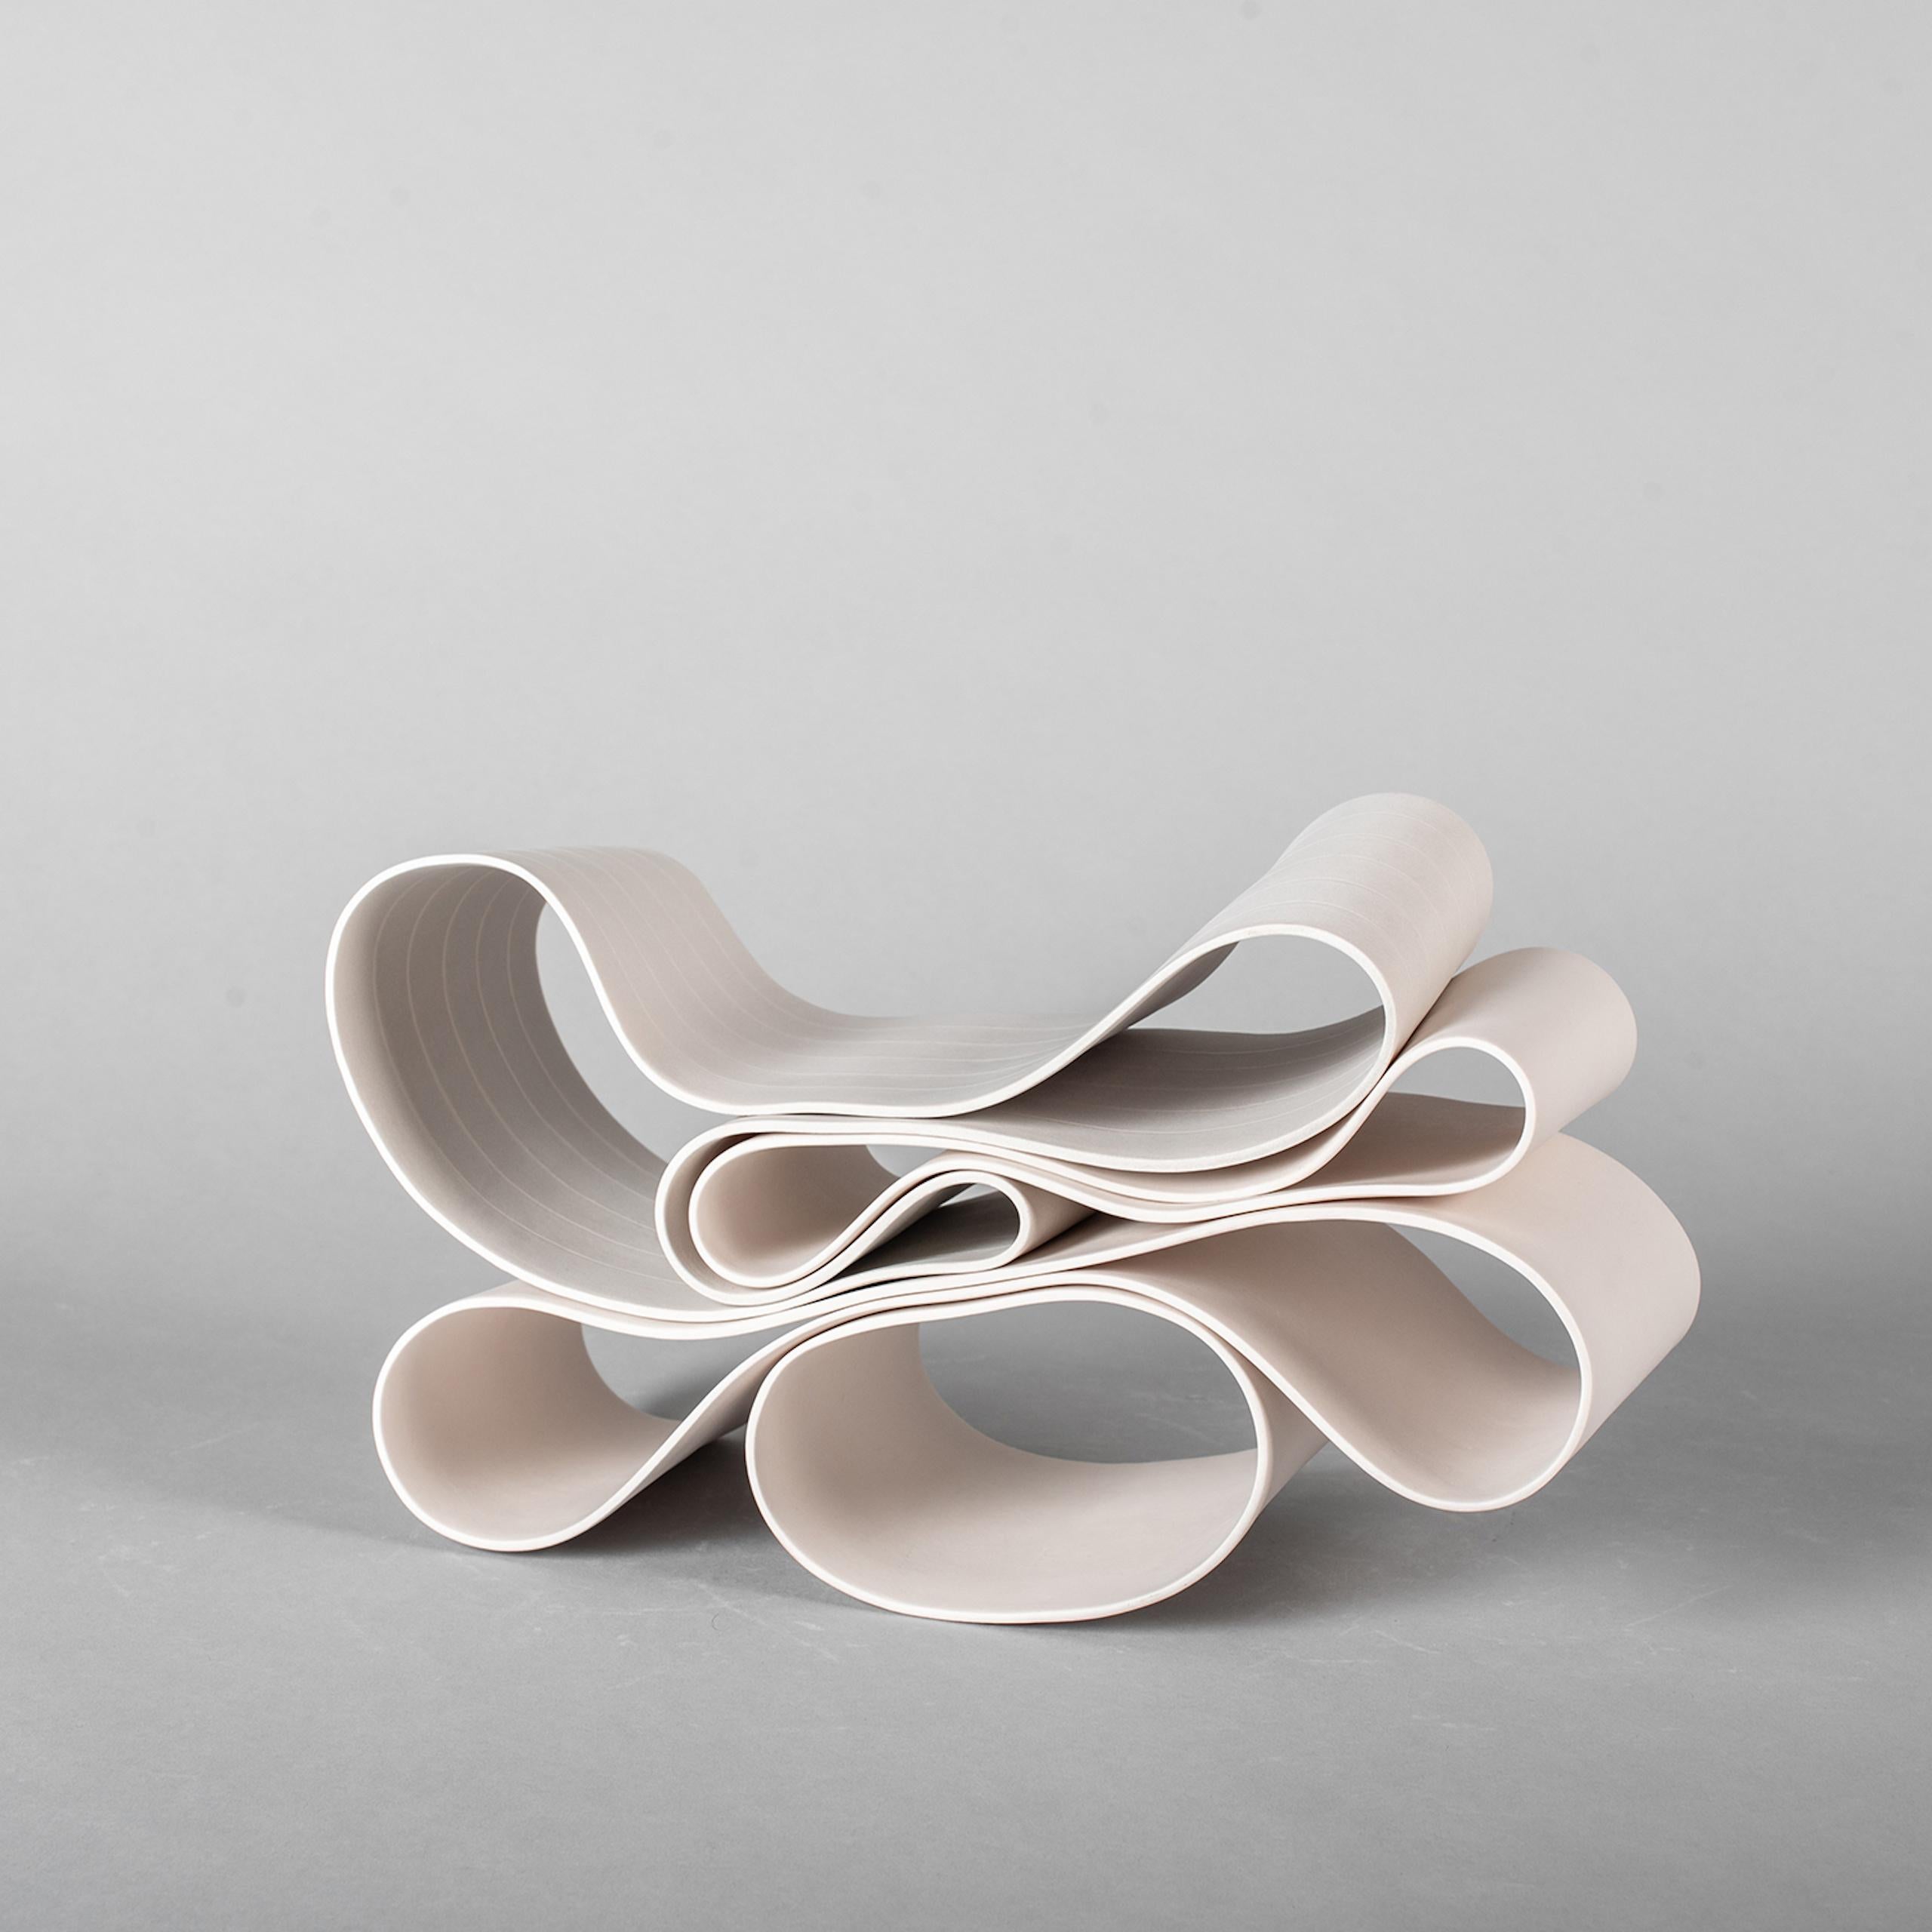 Folding in Motion 10 is a unique paper porcelain sculpture by contemporary artist Simcha Even-Chen, dimensions are 16 cm × 30 cm × 11 cm (6.3 × 11.8 × 4.3 in). The sculpture is signed and comes with a certificate of authenticity.

This sculpture is